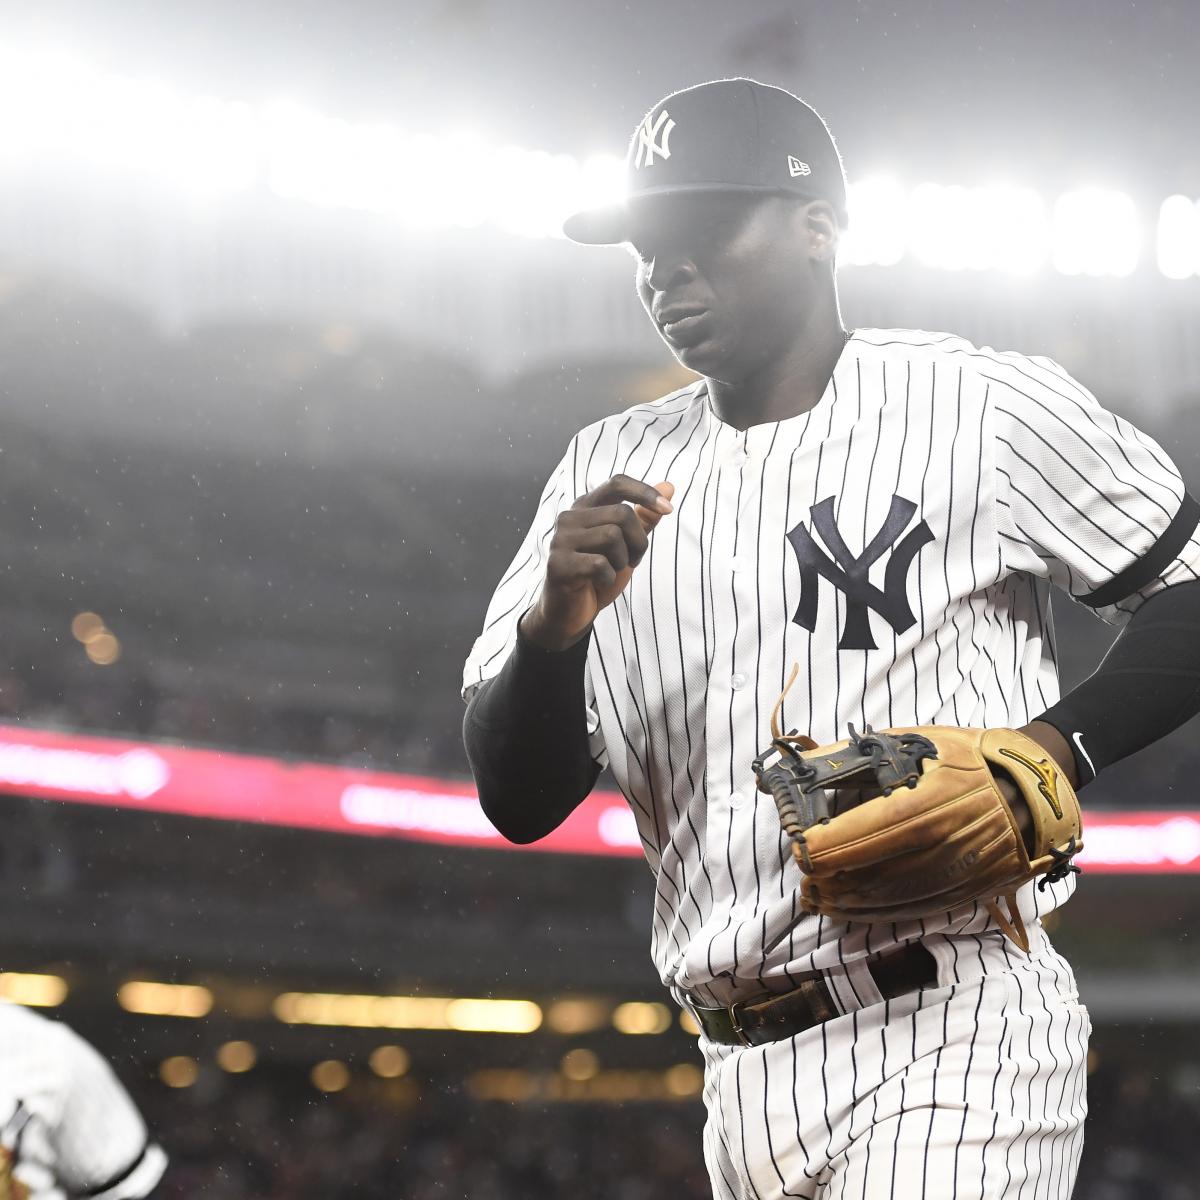 Yankees' Didi Gregorius may be out for season with wrist injury